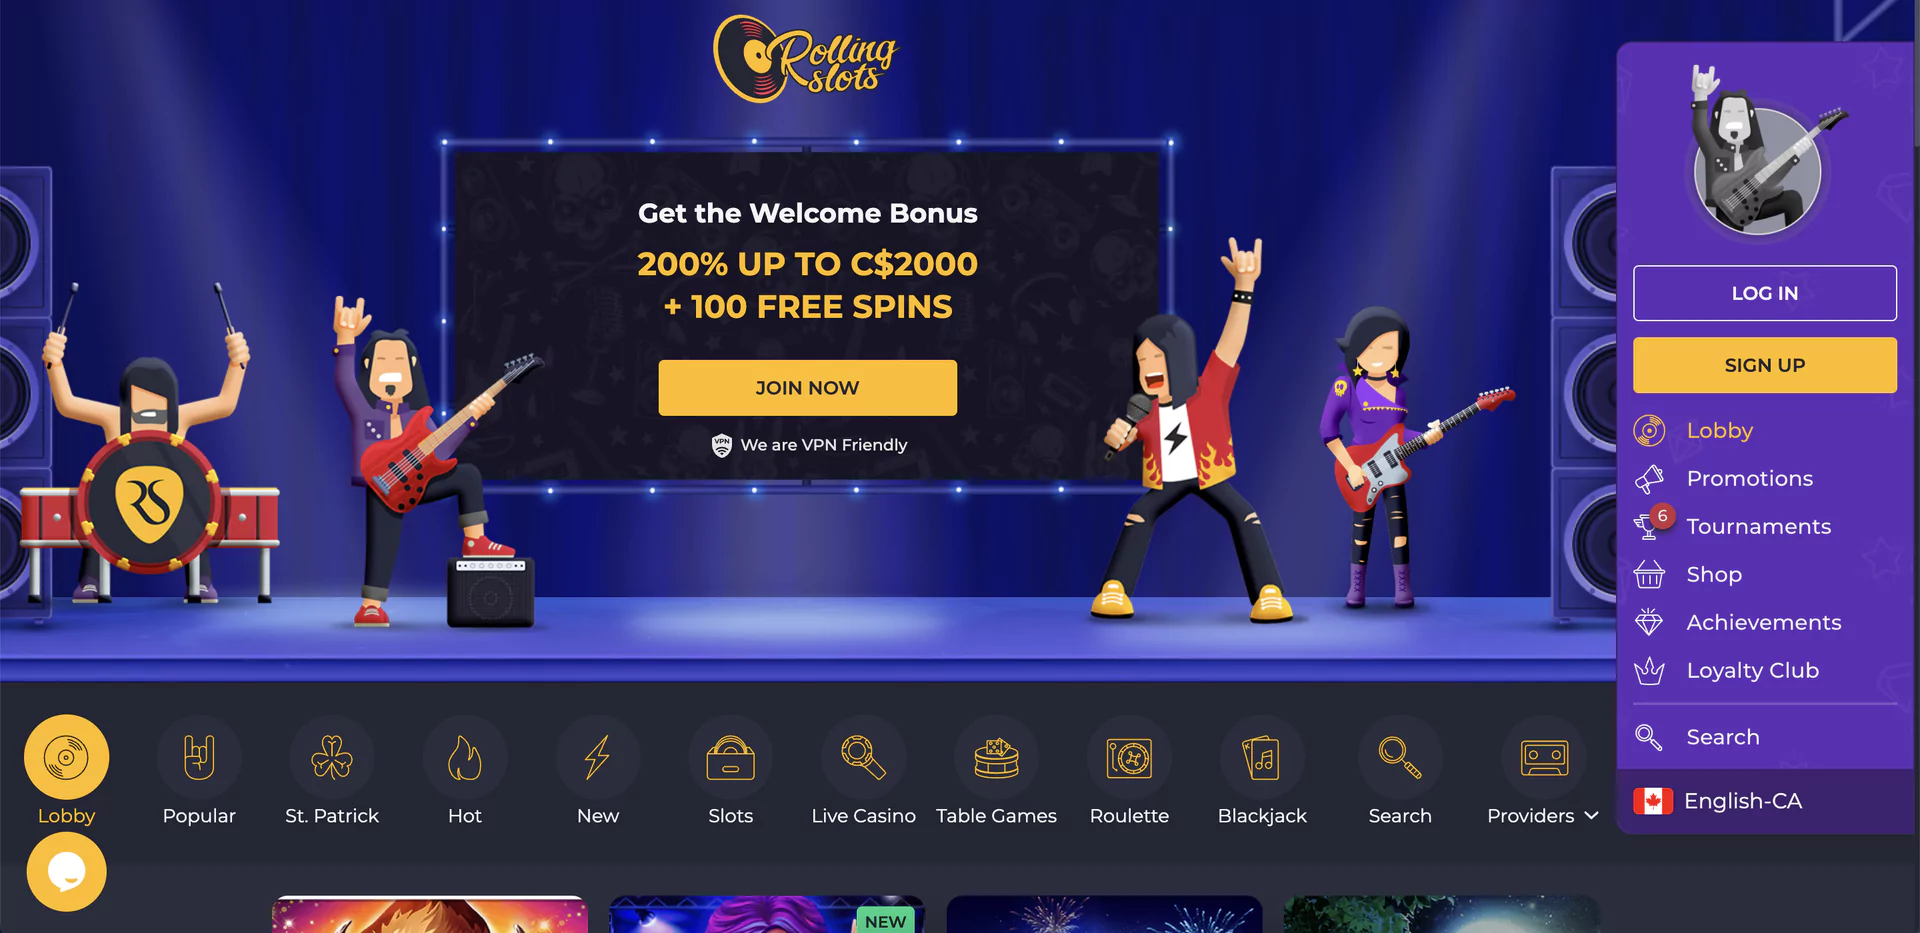 Rolling Stones casino Main Page